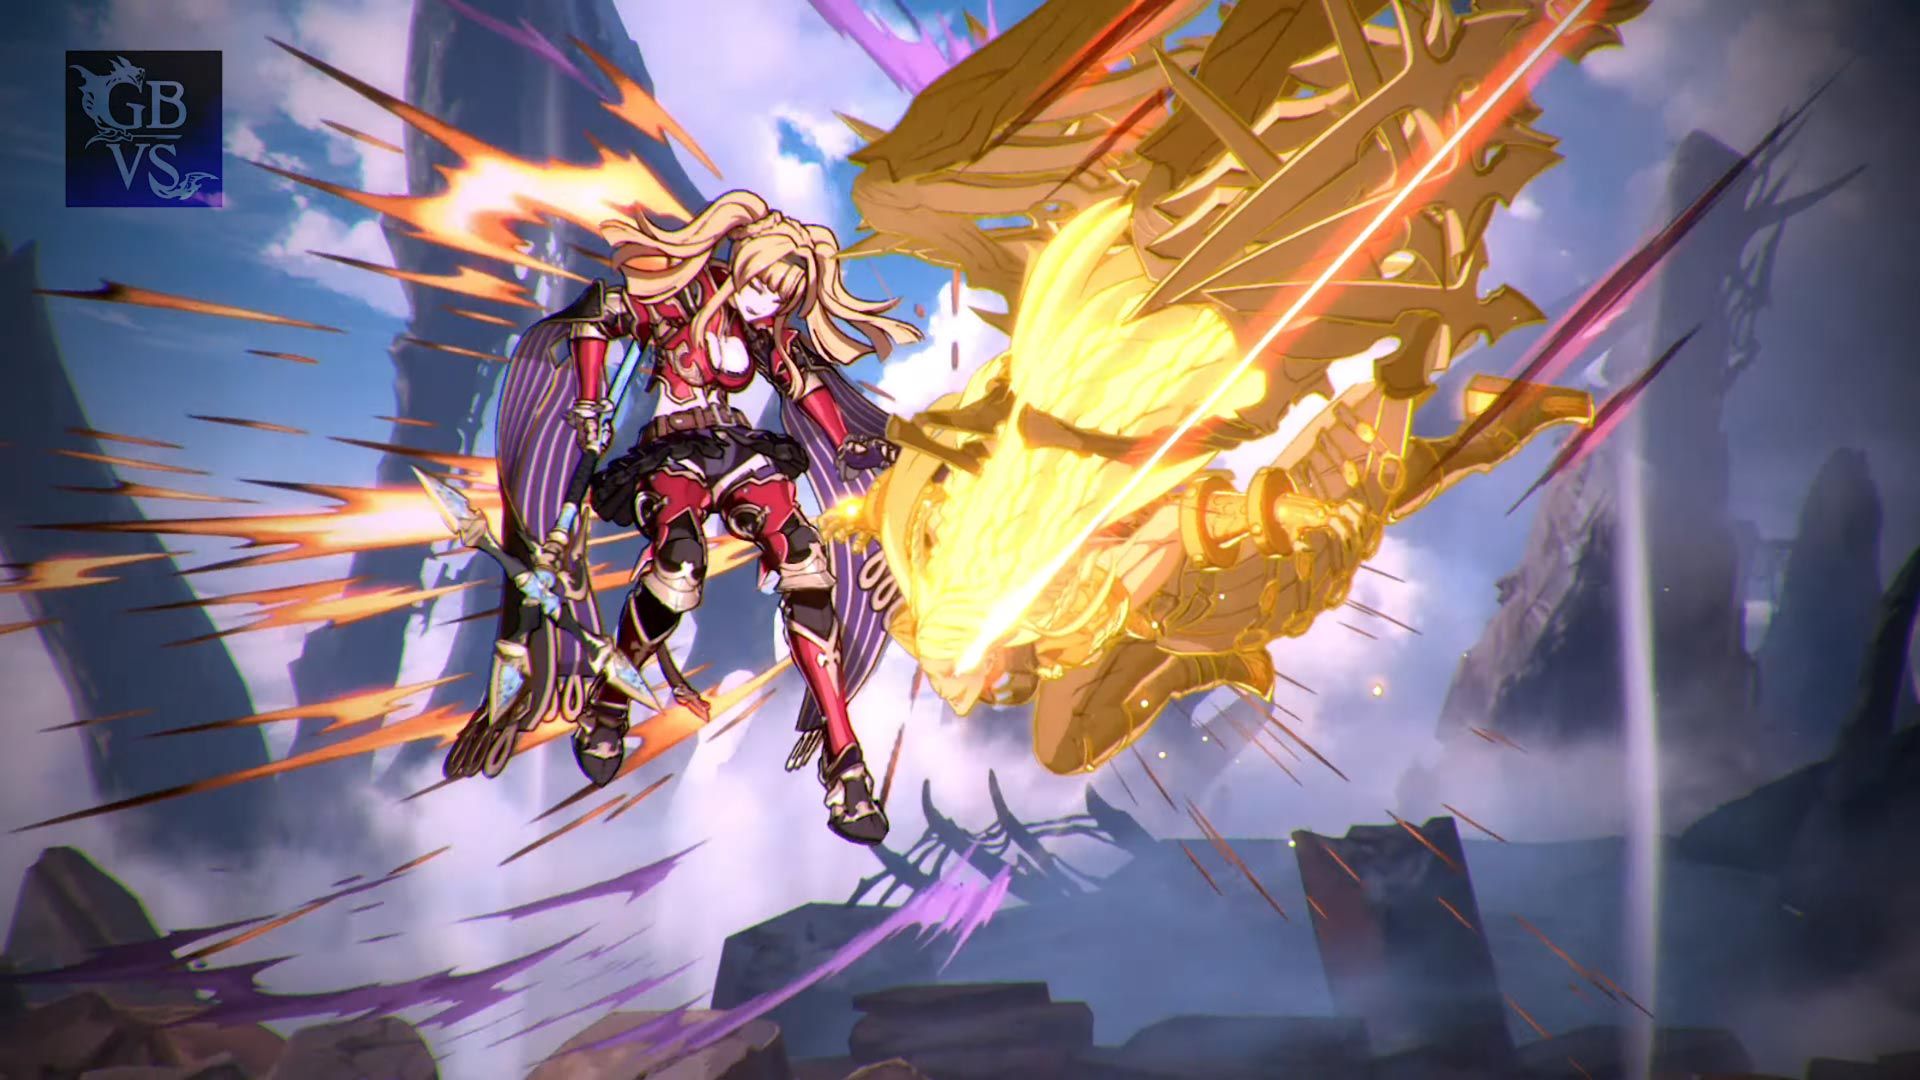 Granblue Fantasy Versus Chaos Bringer Image 5 out of 12